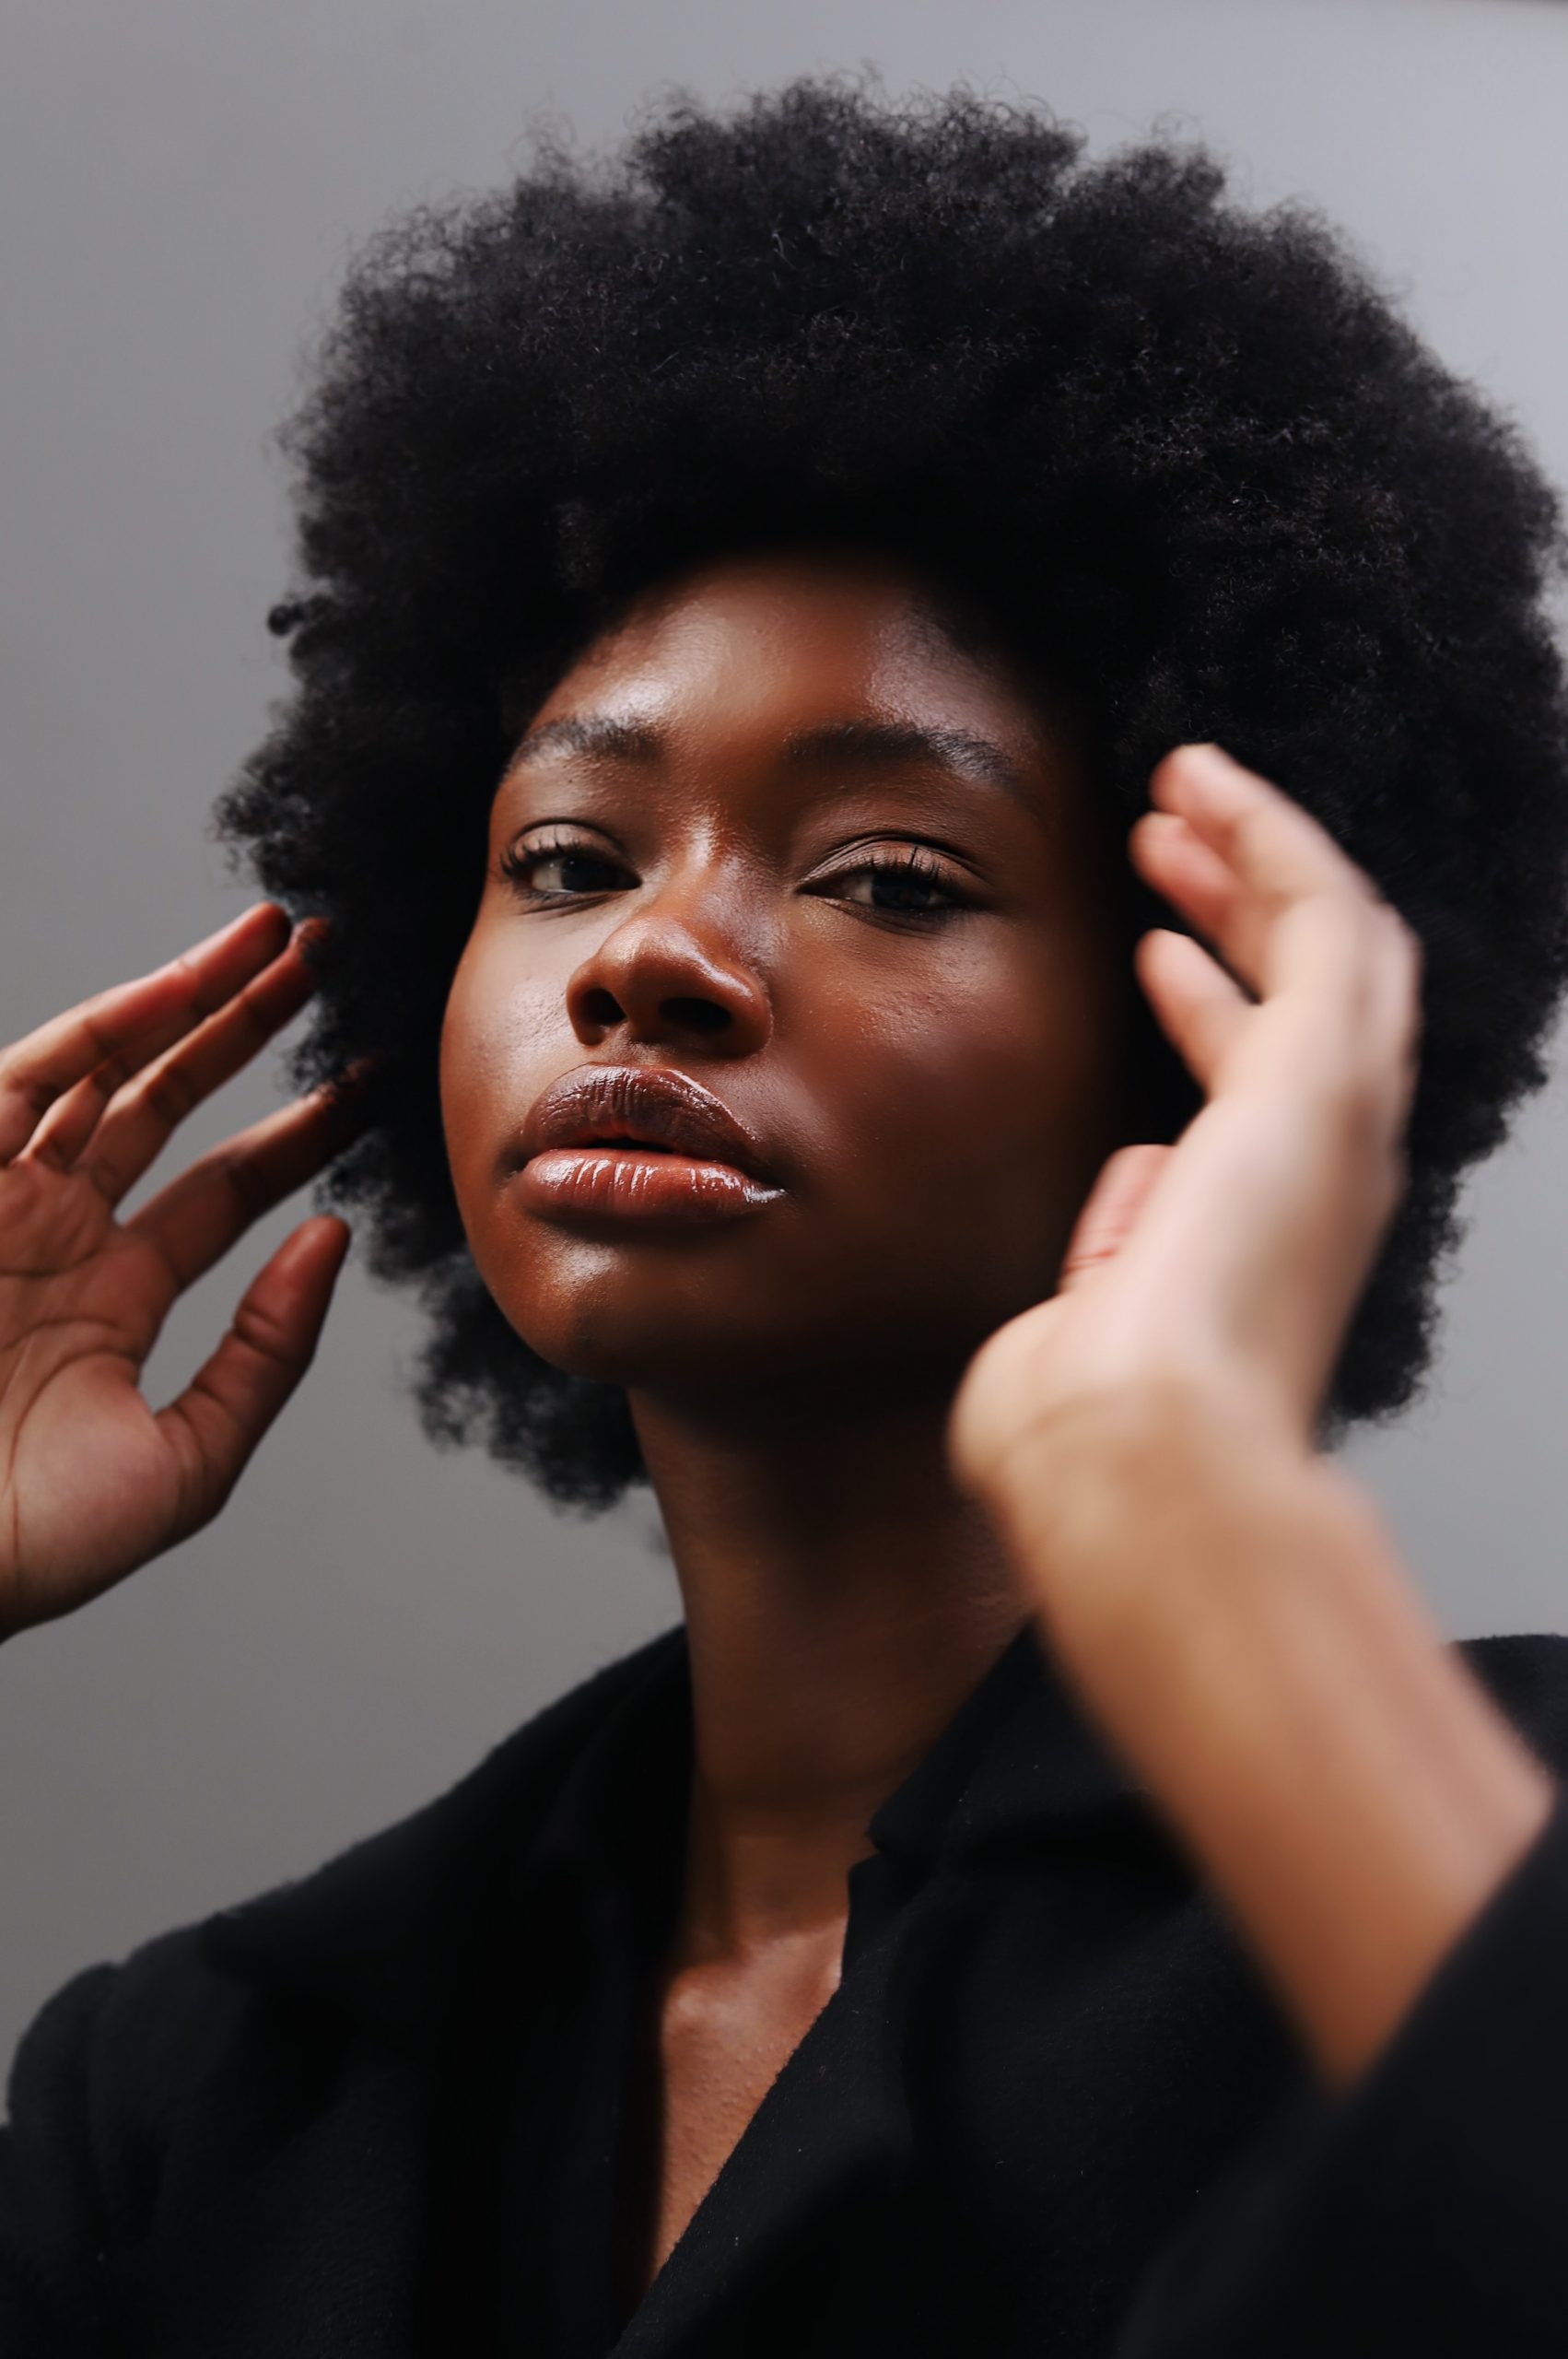 Common Black Hair Care Mistakes to Avoid